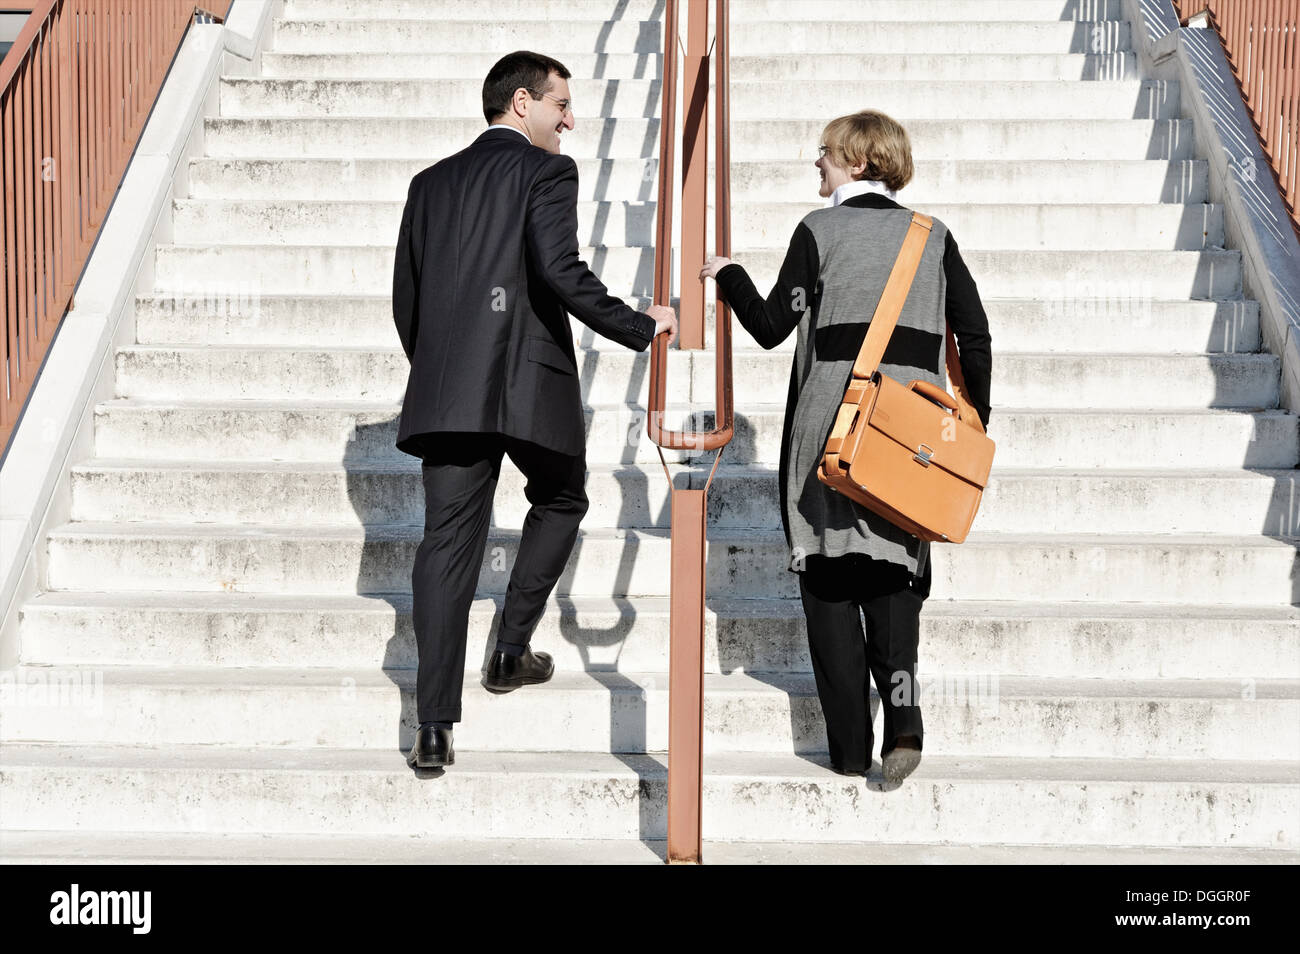 Businesswoman and man ascending staircase, outdoors Stock Photo